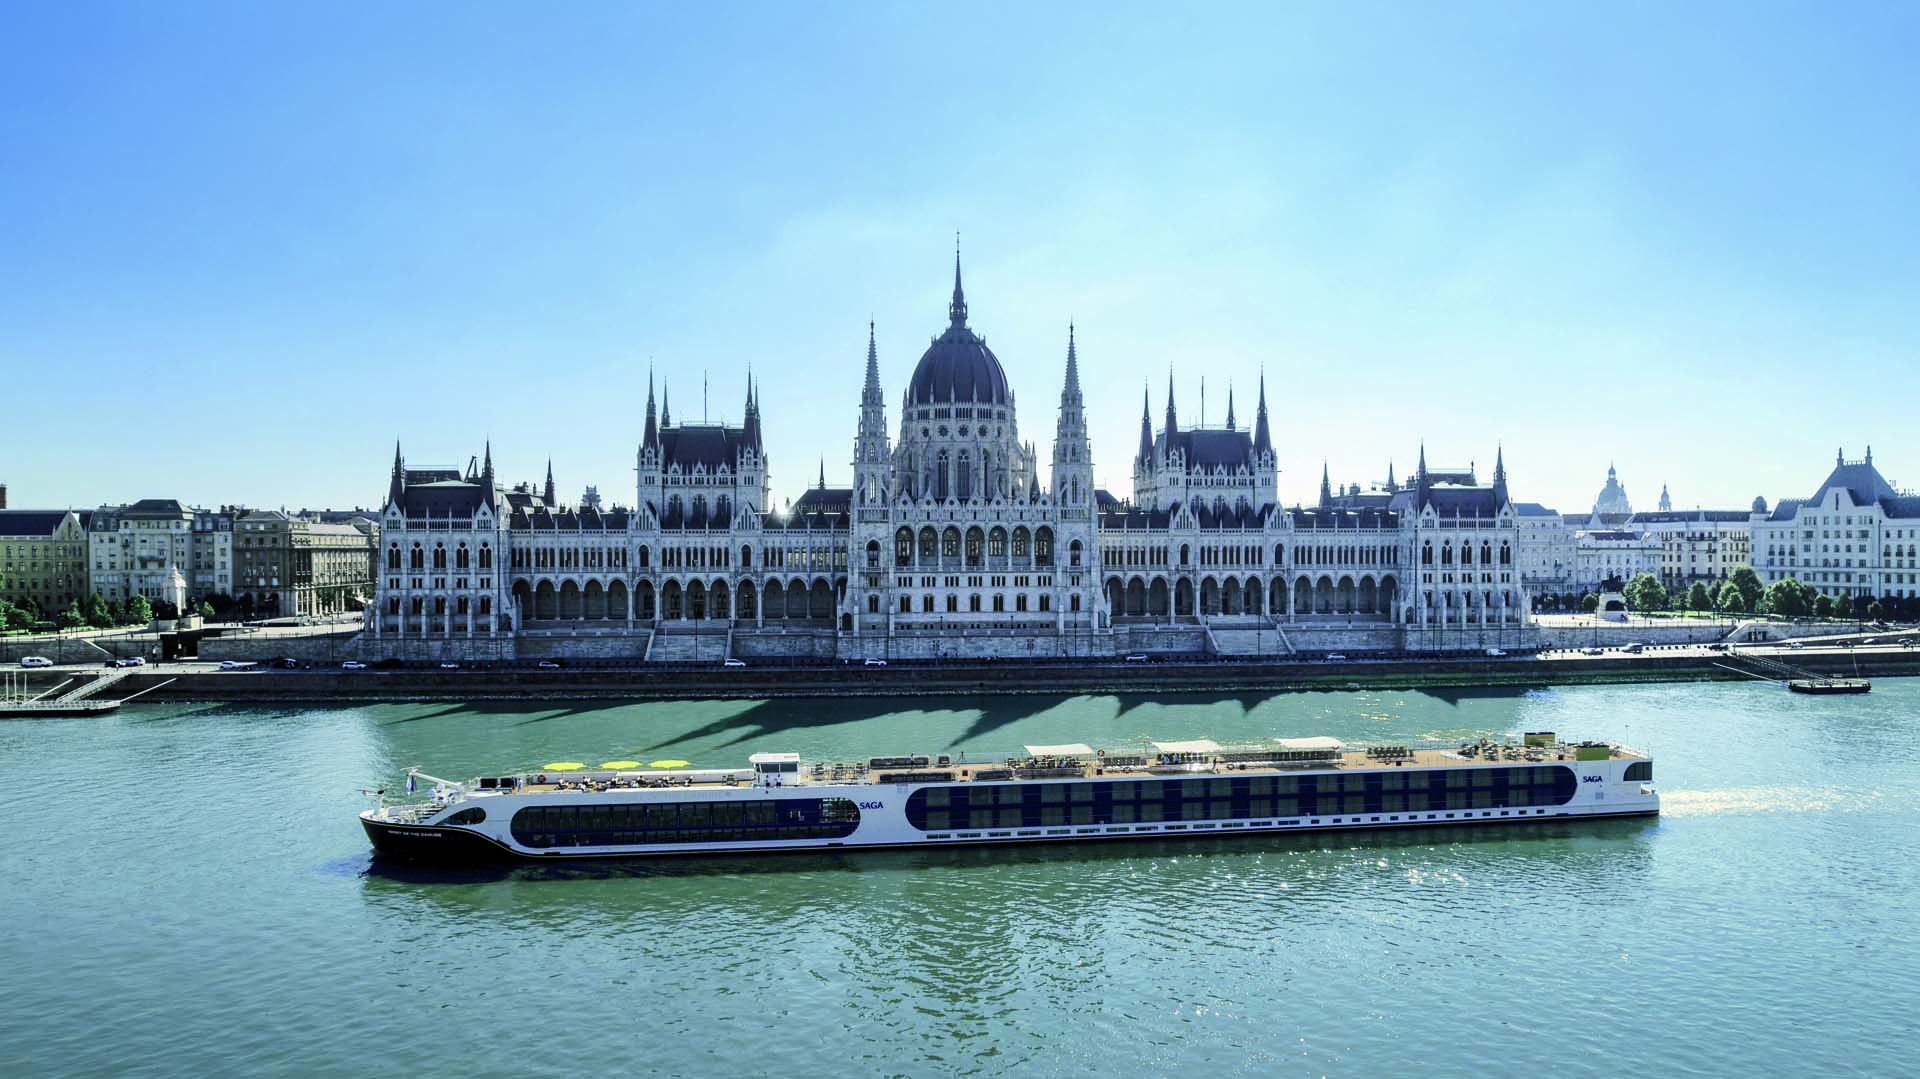 A long river cruise boat moored in front of a huge palatial building